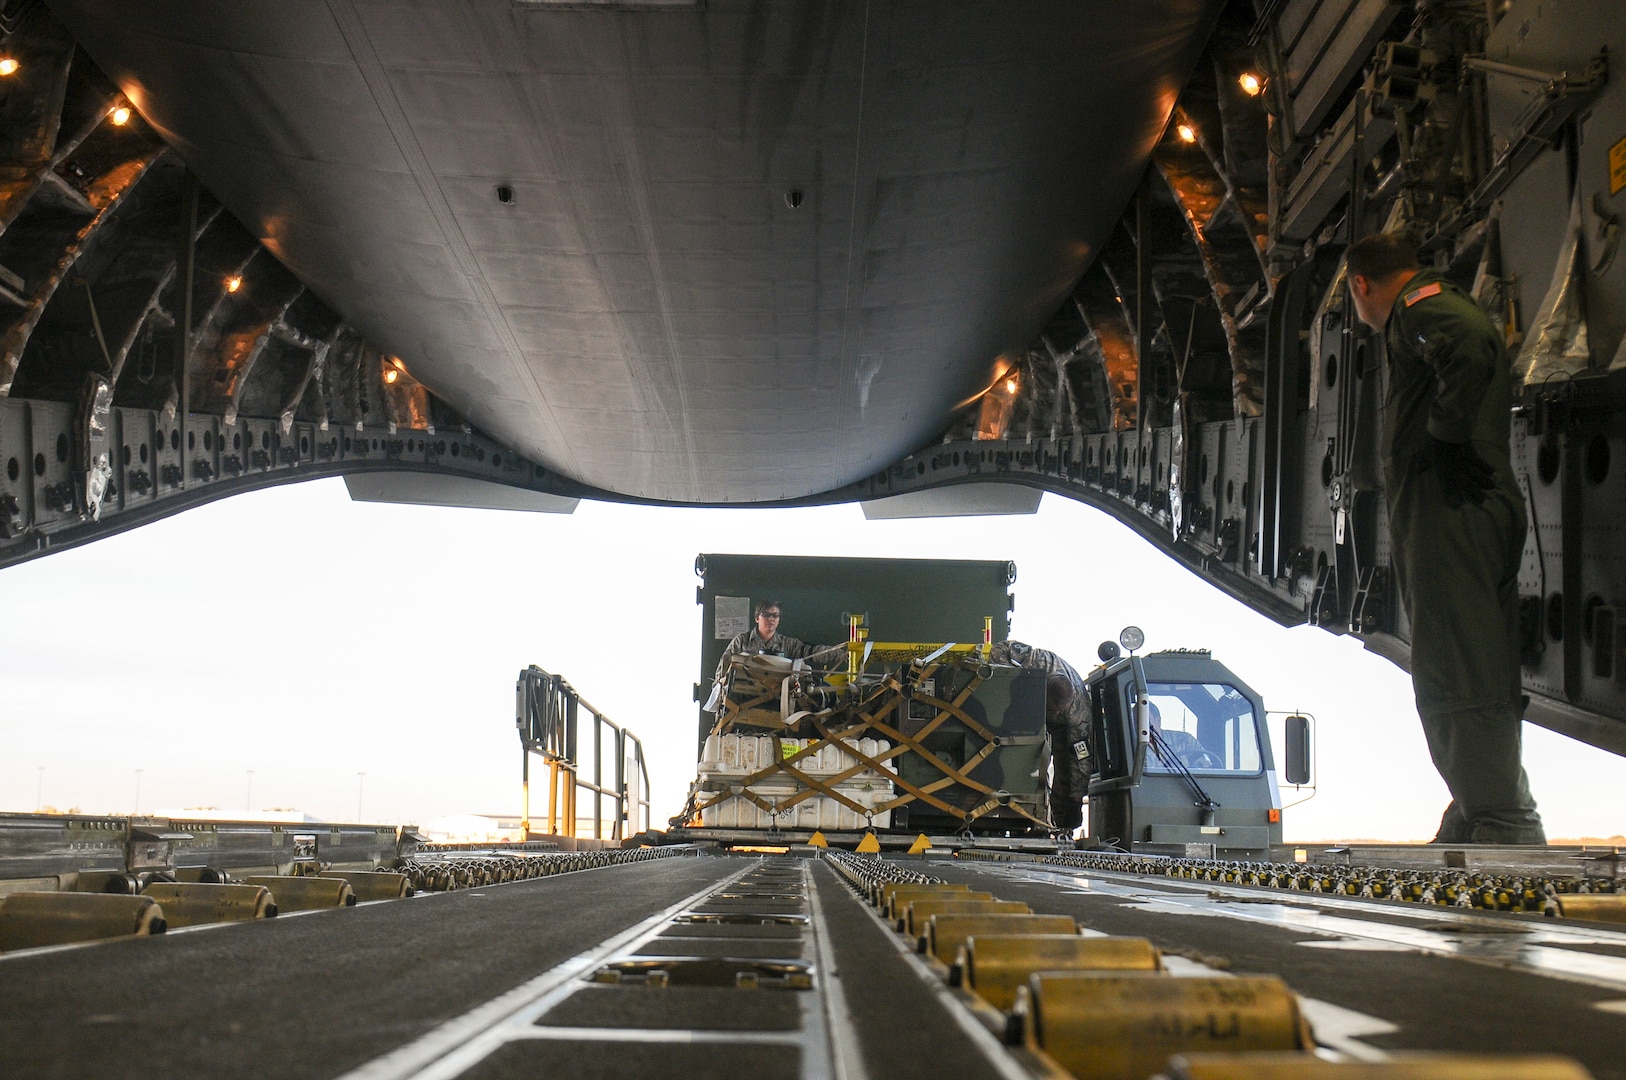 Members of the 121st Air Refueling Wing and 1st Battalion, 137th Aviation Regiment, assist members of the Tennessee National Guard’s 164th Airlift Wing with loading equipment and supplies into a C-17 Globemaster III Oct. 26, 2017, at Rickenbacker Air National Guard Base in Columbus, Ohio.